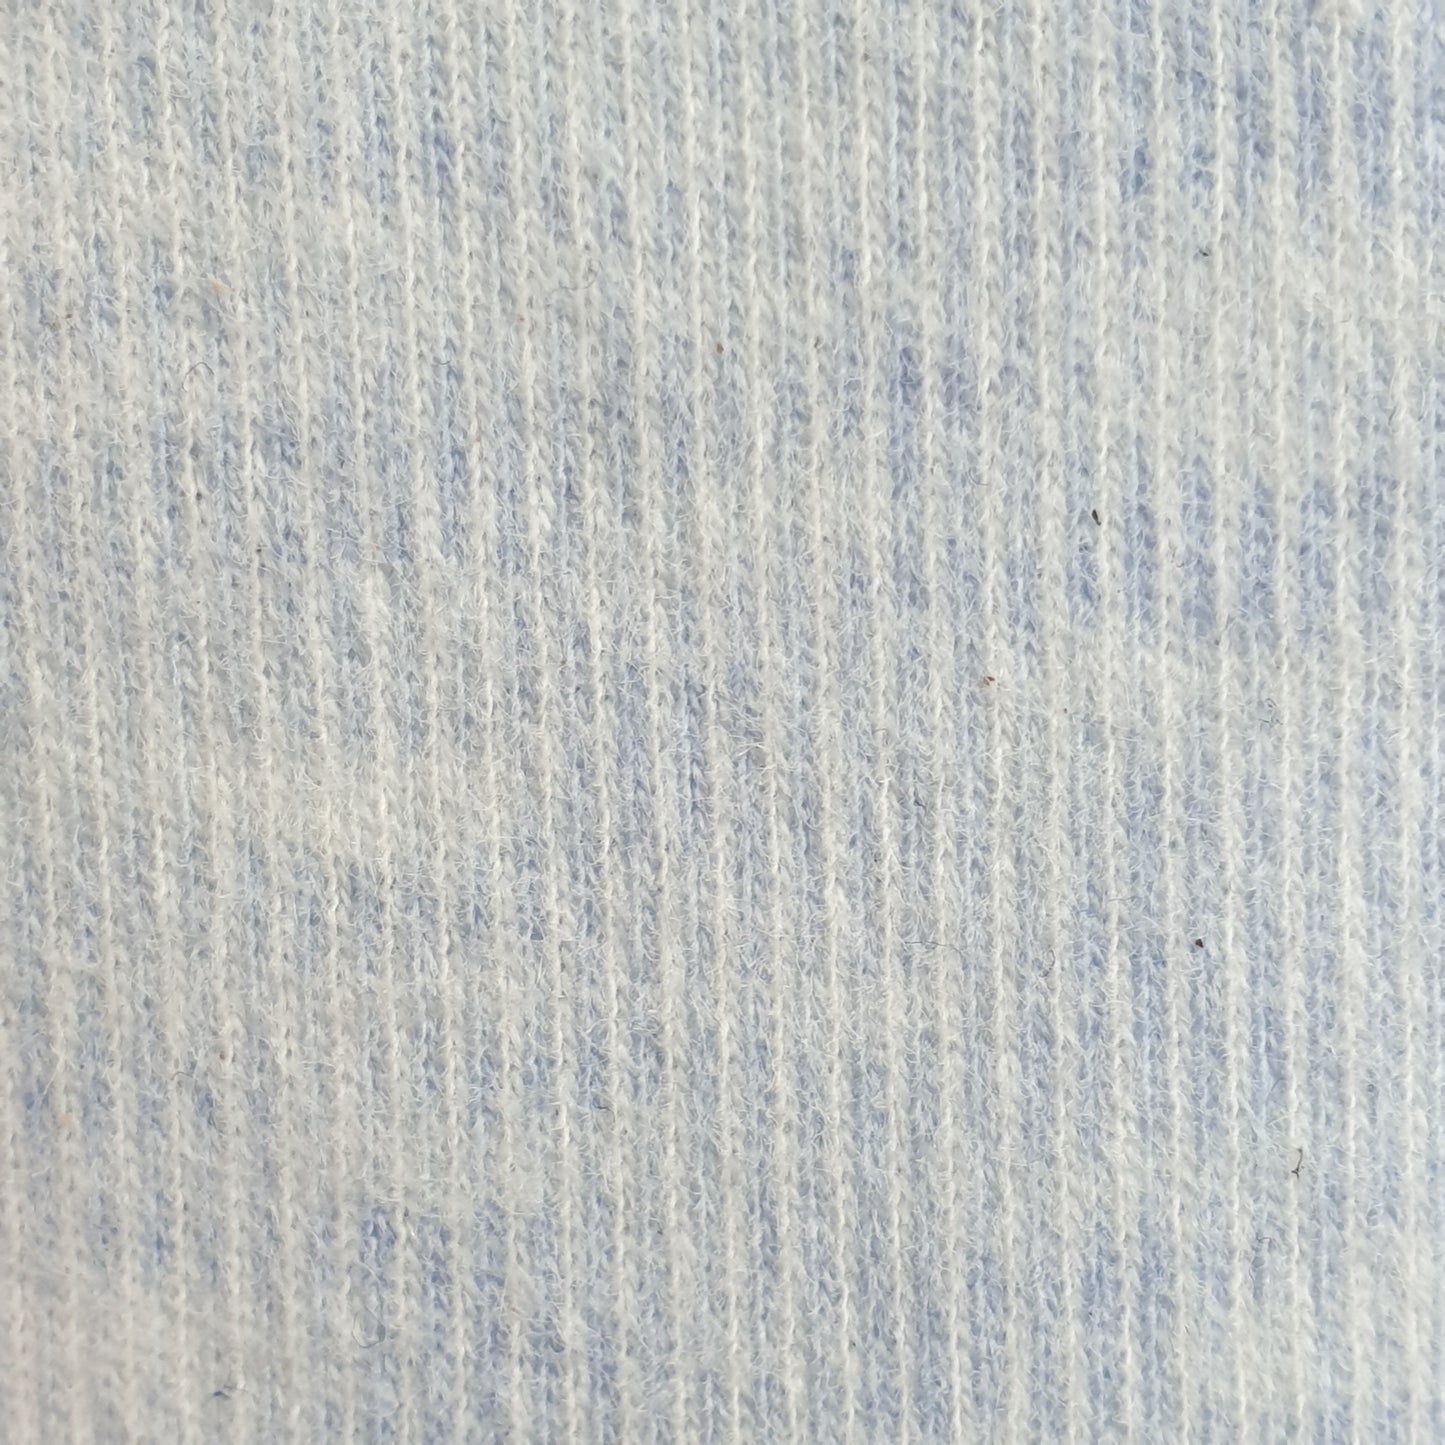 Pastel Blue Marle - 2 way stretch 100% Cotton Jersey Fabric - You’ve Got Me In Stitches